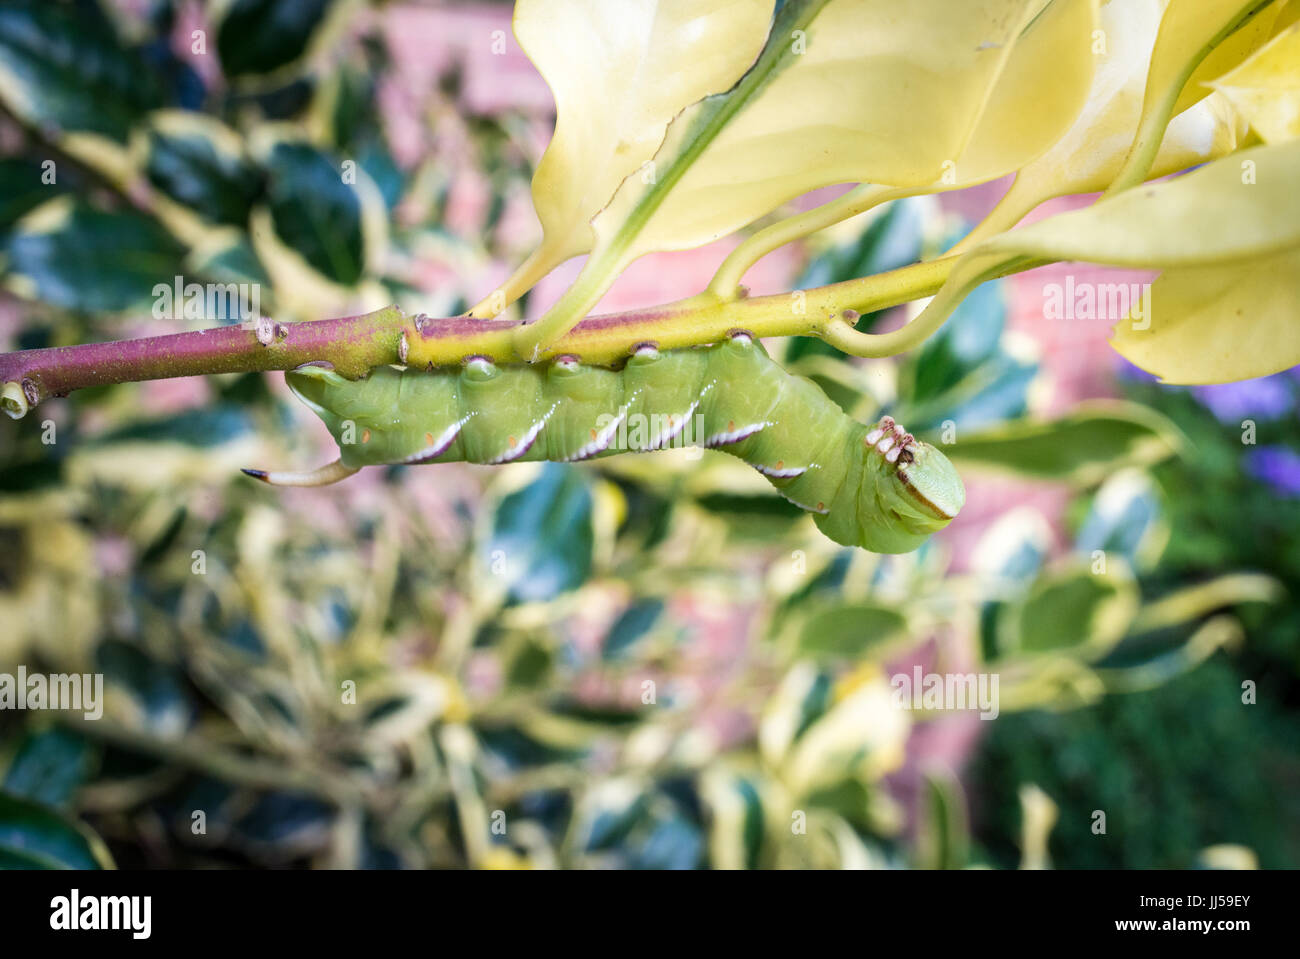 Large and succulent green white striped caterpillar of a privet hawk moth crawling along the branch of a holly bush, Hampshire, UK Stock Photo